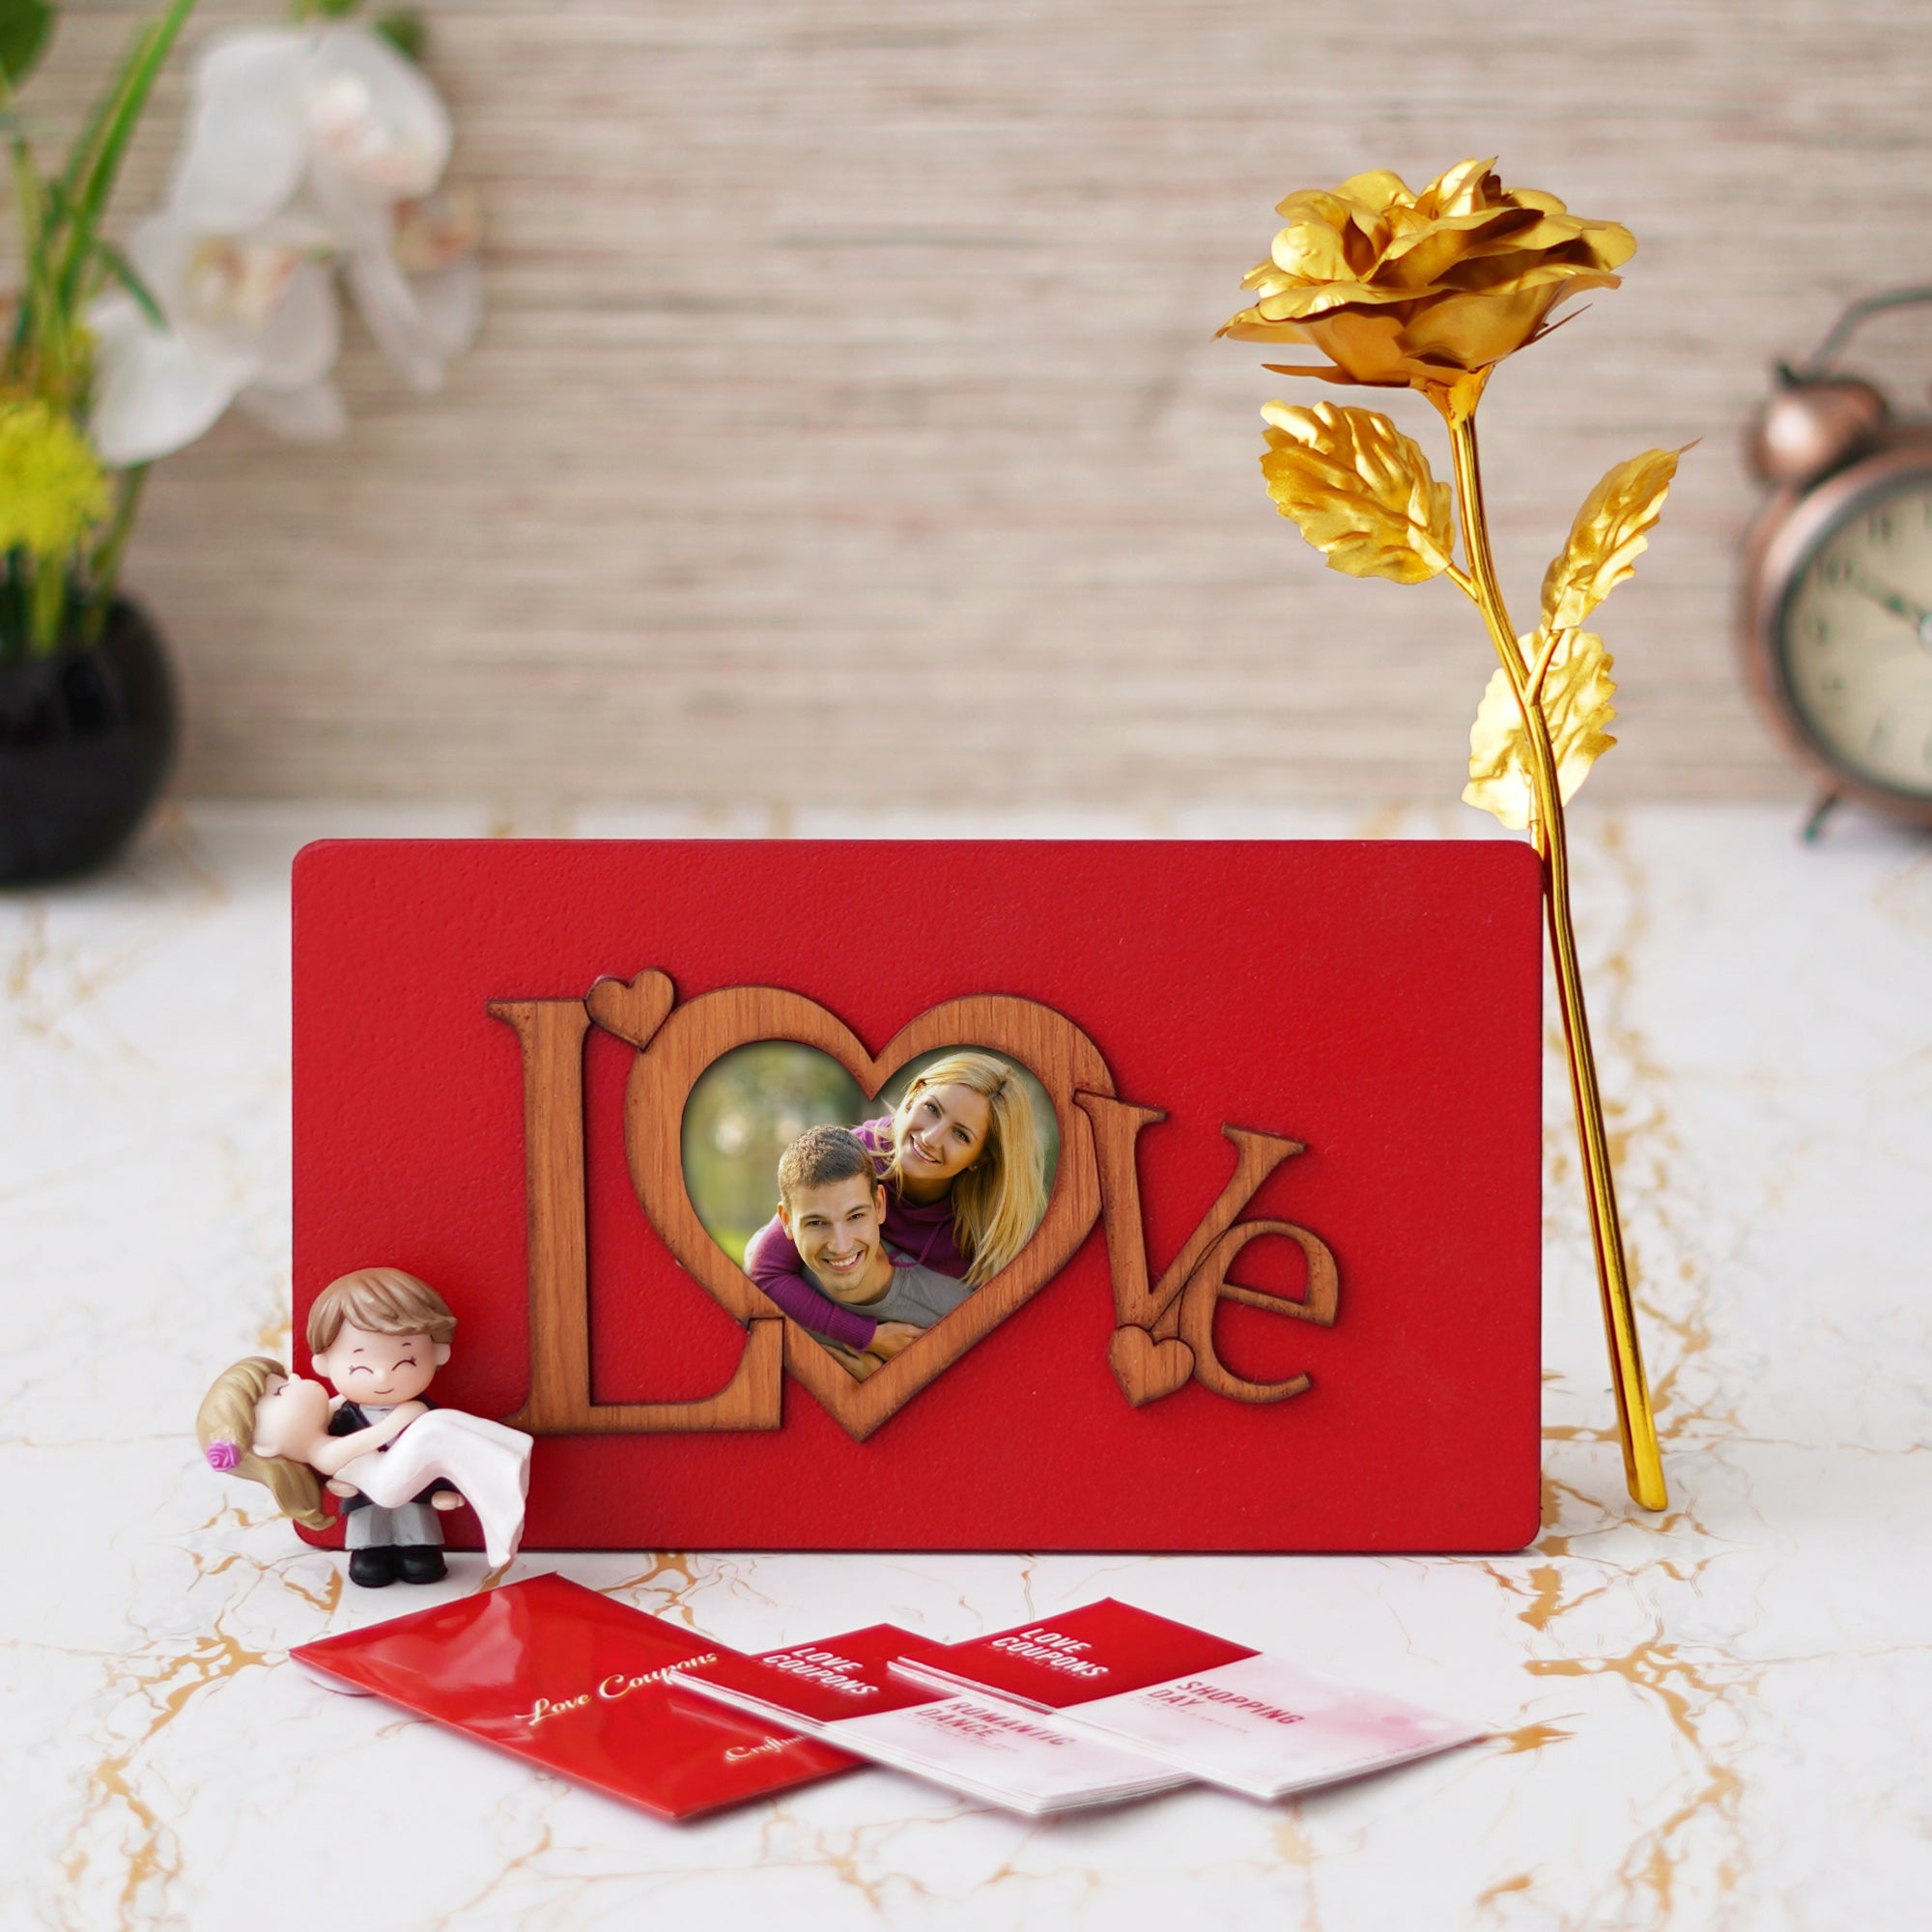 Valentine Combo of Pack of 12 Love Coupons Gift Cards Set, Golden Rose Gift Set, "Love" Wooden Photo Frame With Red Stand, Bride Kissing Groom Romantic Polyresin Decorative Showpiece